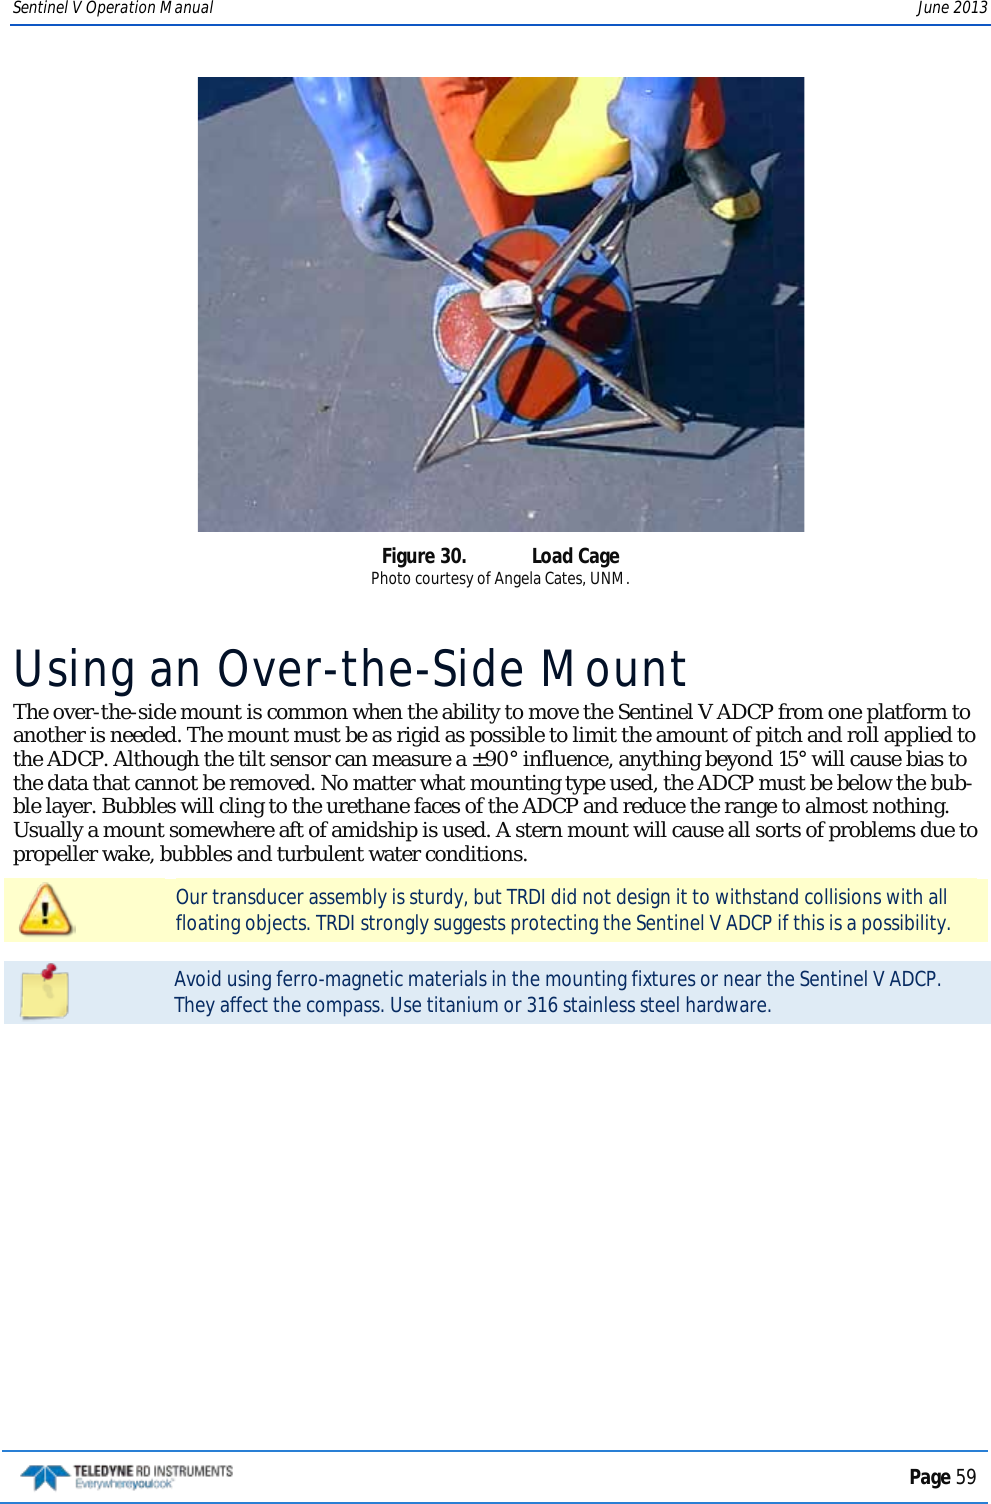 Sentinel V Operation Manual June 2013  Figure 30.  Load Cage Photo courtesy of Angela Cates, UNM. Using an Over-the-Side Mount The over-the-side mount is common when the ability to move the Sentinel V ADCP from one platform to another is needed. The mount must be as rigid as possible to limit the amount of pitch and roll applied to the ADCP. Although the tilt sensor can measure a ±90° influence, anything beyond 15° will cause bias to the data that cannot be removed. No matter what mounting type used, the ADCP must be below the bub-ble layer. Bubbles will cling to the urethane faces of the ADCP and reduce the range to almost nothing. Usually a mount somewhere aft of amidship is used. A stern mount will cause all sorts of problems due to propeller wake, bubbles and turbulent water conditions.  Our transducer assembly is sturdy, but TRDI did not design it to withstand collisions with all floating objects. TRDI strongly suggests protecting the Sentinel V ADCP if this is a possibility.   Avoid using ferro-magnetic materials in the mounting fixtures or near the Sentinel V ADCP. They affect the compass. Use titanium or 316 stainless steel hardware.   Page 59  